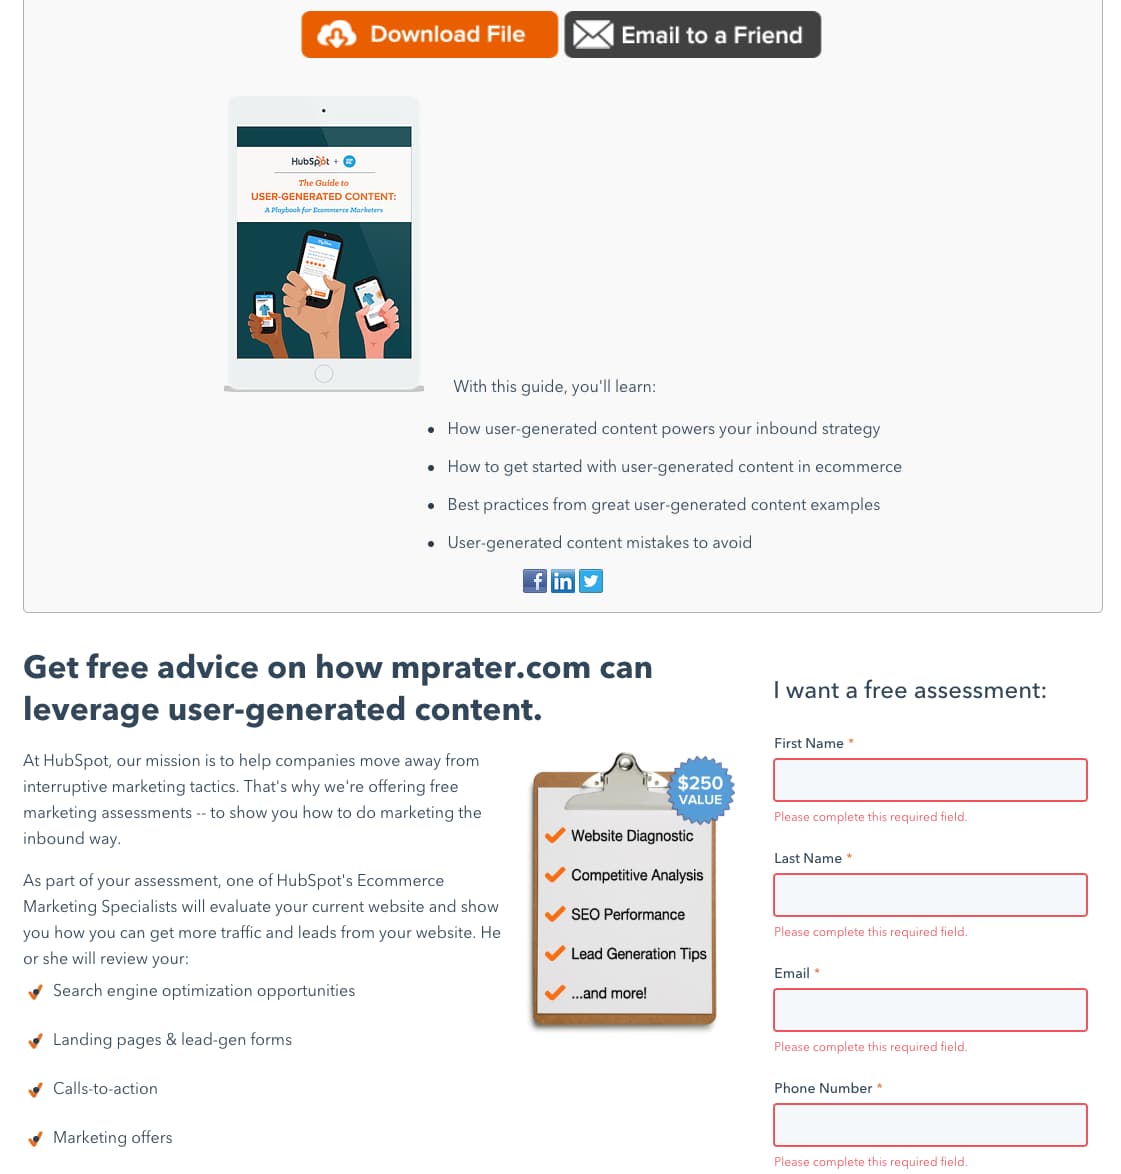 thank-you-landing-page-example "width =" 1121 "style =" width: 1121px; blocco di visualizzazione; margin-left: auto; margin-right: auto; "srcset =" https://blog.hubspot.com/hs-fs/hubfs/thank-you-landing-page-example.jpg?width=561&name=thank-you-landing-page- example.jpg 561w, https://blog.hubspot.com/hs-fs/hubfs/thank-you-landing-page-example.jpg?width=1121&name=thank-you-landing-page-example.jpg 1121w, https://blog.hubspot.com/hs-fs/hubfs/thank-you-landing-page-example.jpg?width=1682&name=thank-you-landing-page-example.jpg 1682w, https: // blog .hubspot.com / hs-fs / hubfs / thank-you-landing-page-example.jpg? width = 2242 & name = thank-you-landing-page-example.jpg 2242w, https://blog.hubspot.com/ hs-fs / hubfs / thank-you-landing-page-example.jpg? width = 2803 & name = thank-you-landing-page-example.jpg 2803w, https://blog.hubspot.com/hs-fs/hubfs /thank-you-landing-page-example.jpg?width=3363&name=thank-you-landing-page-example.jpg 3363w "sizes =" (larghezza massima: 1121px) 100vw, 1121px